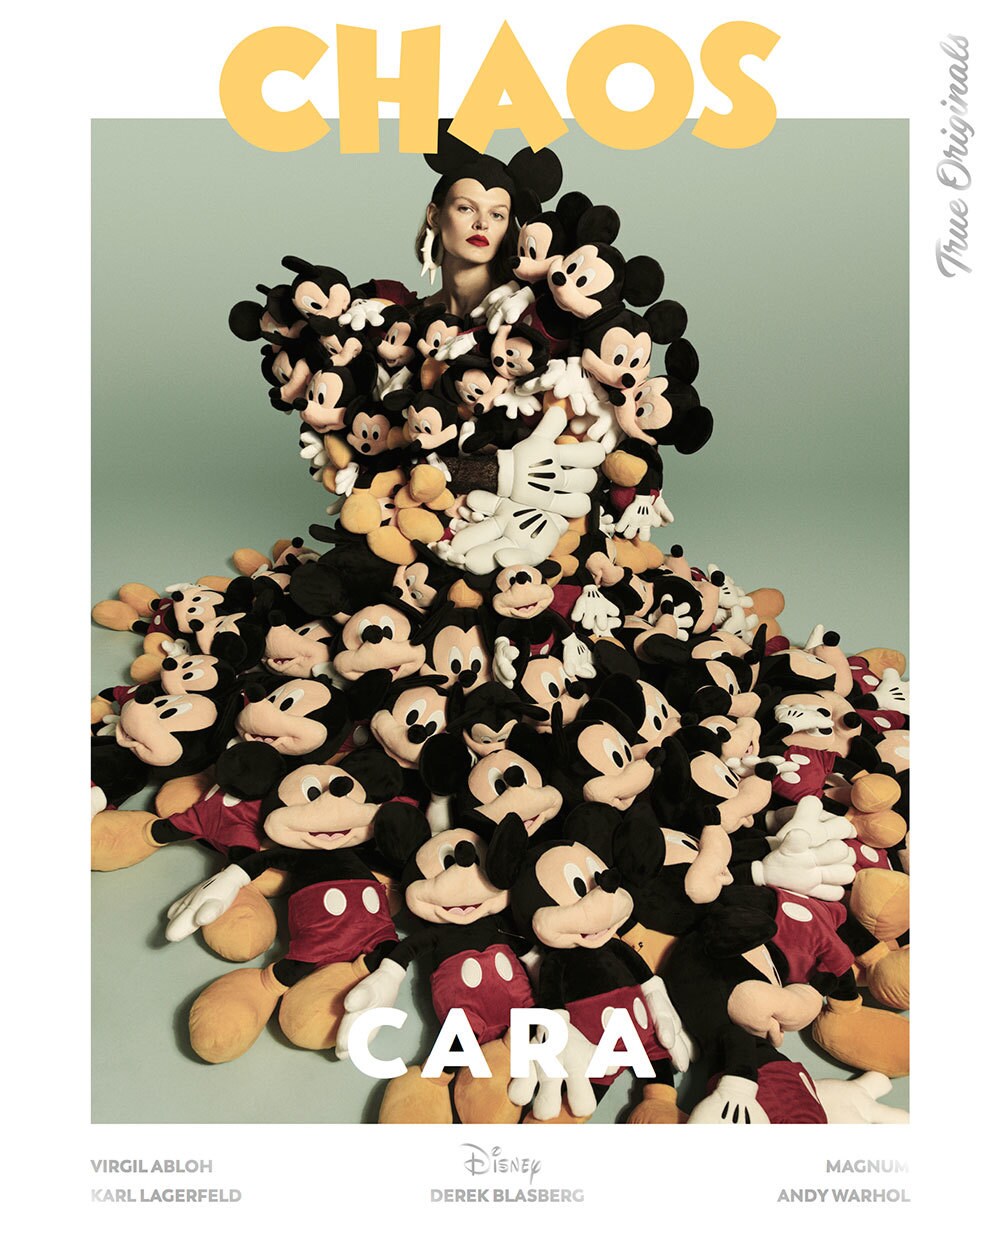 Cara Taylor on a special edition cover for Chaos magazine